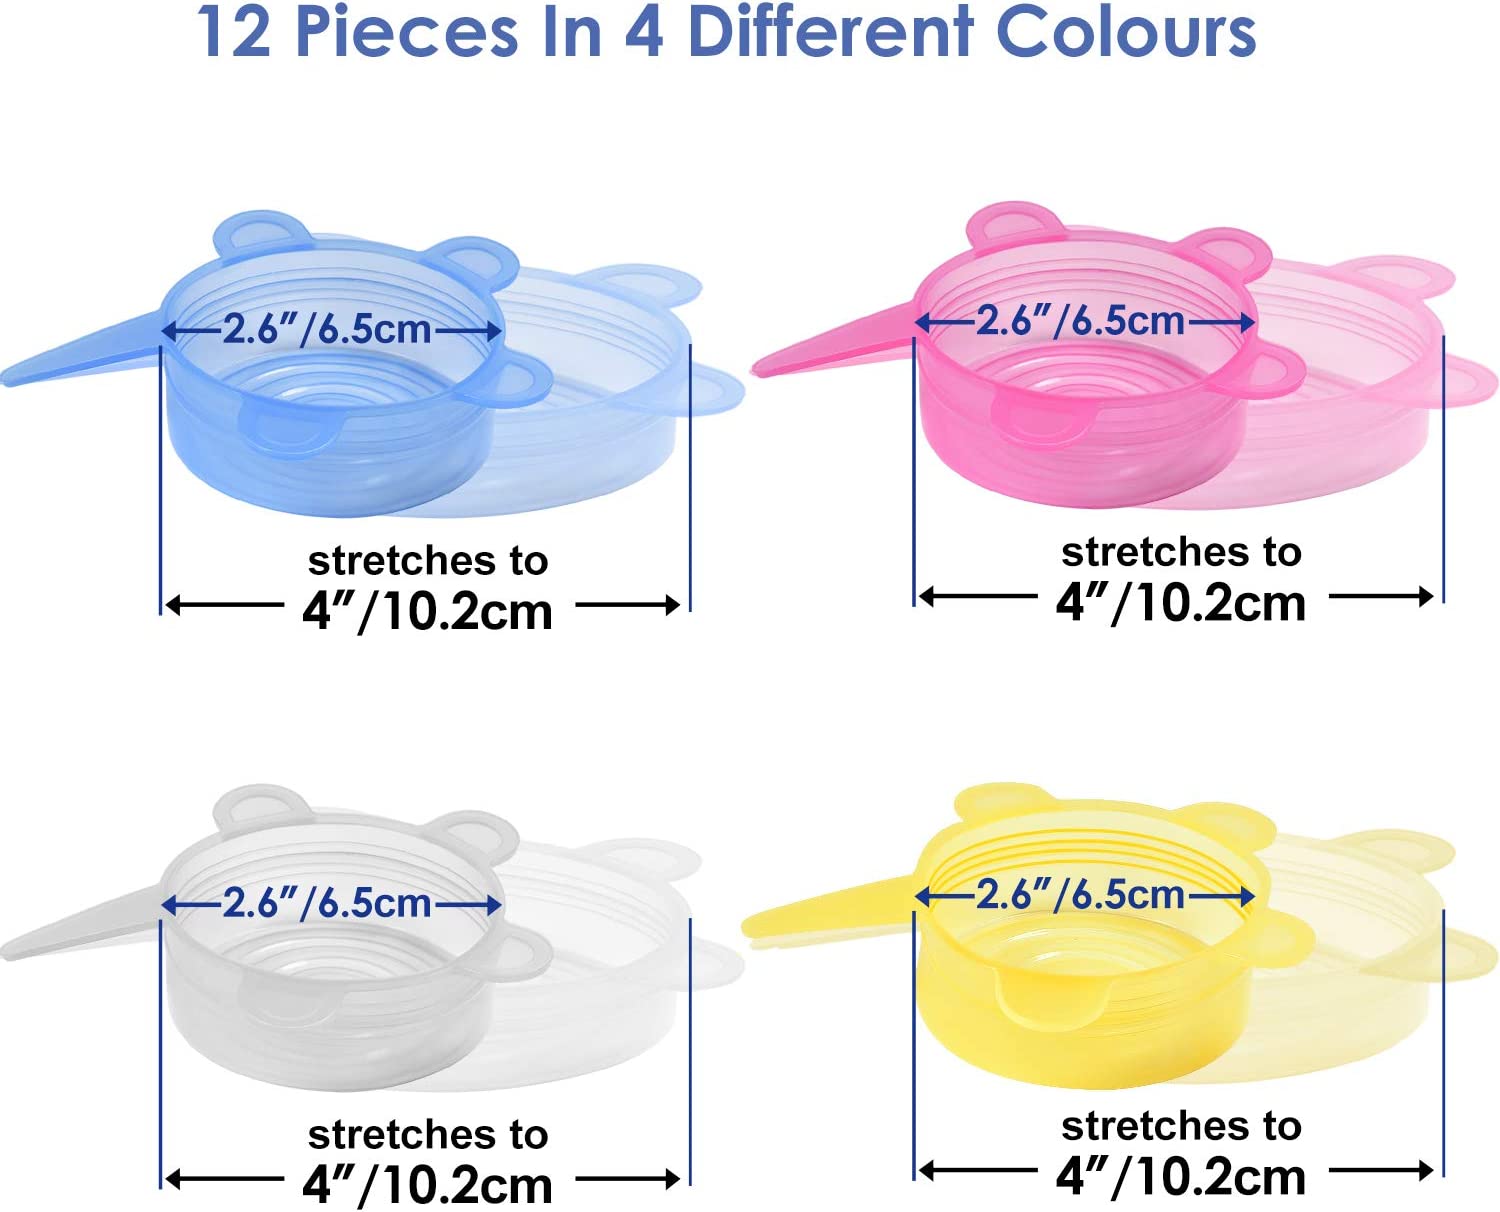 Longzon Silicone Stretch Lids 14 Pack Include 2Pcs Size up to 9.8''  Diameter,Reusable Durable Food Storage Covers for Bowl,7 Different Sizes to  Meet